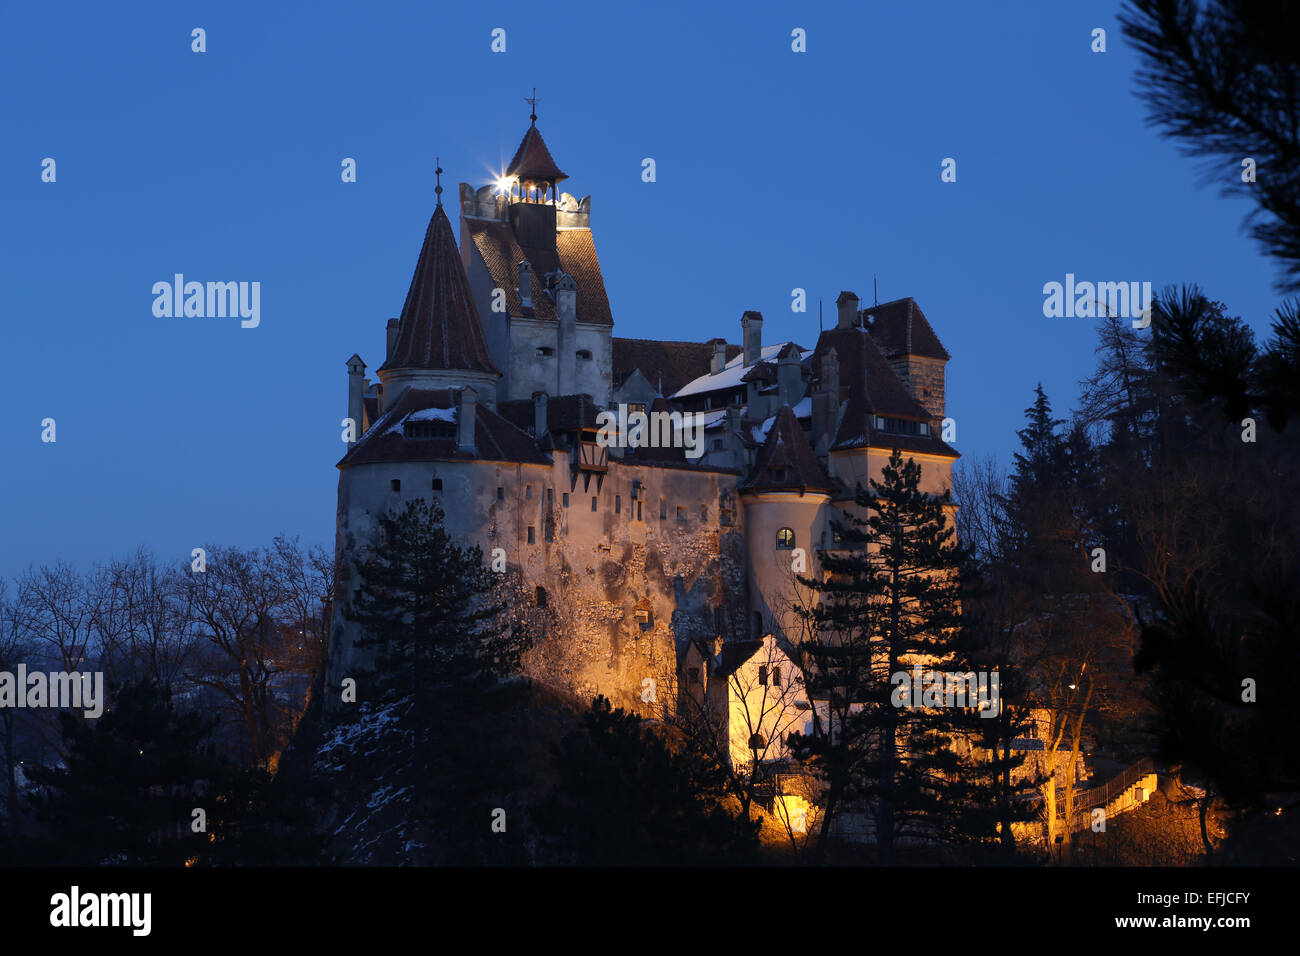 Bran Castle in Transylvania, Romania, famous residence of Vlad the Impaler (Vlad Tepes), also known as Dracula. Blue hour shot. Stock Photo